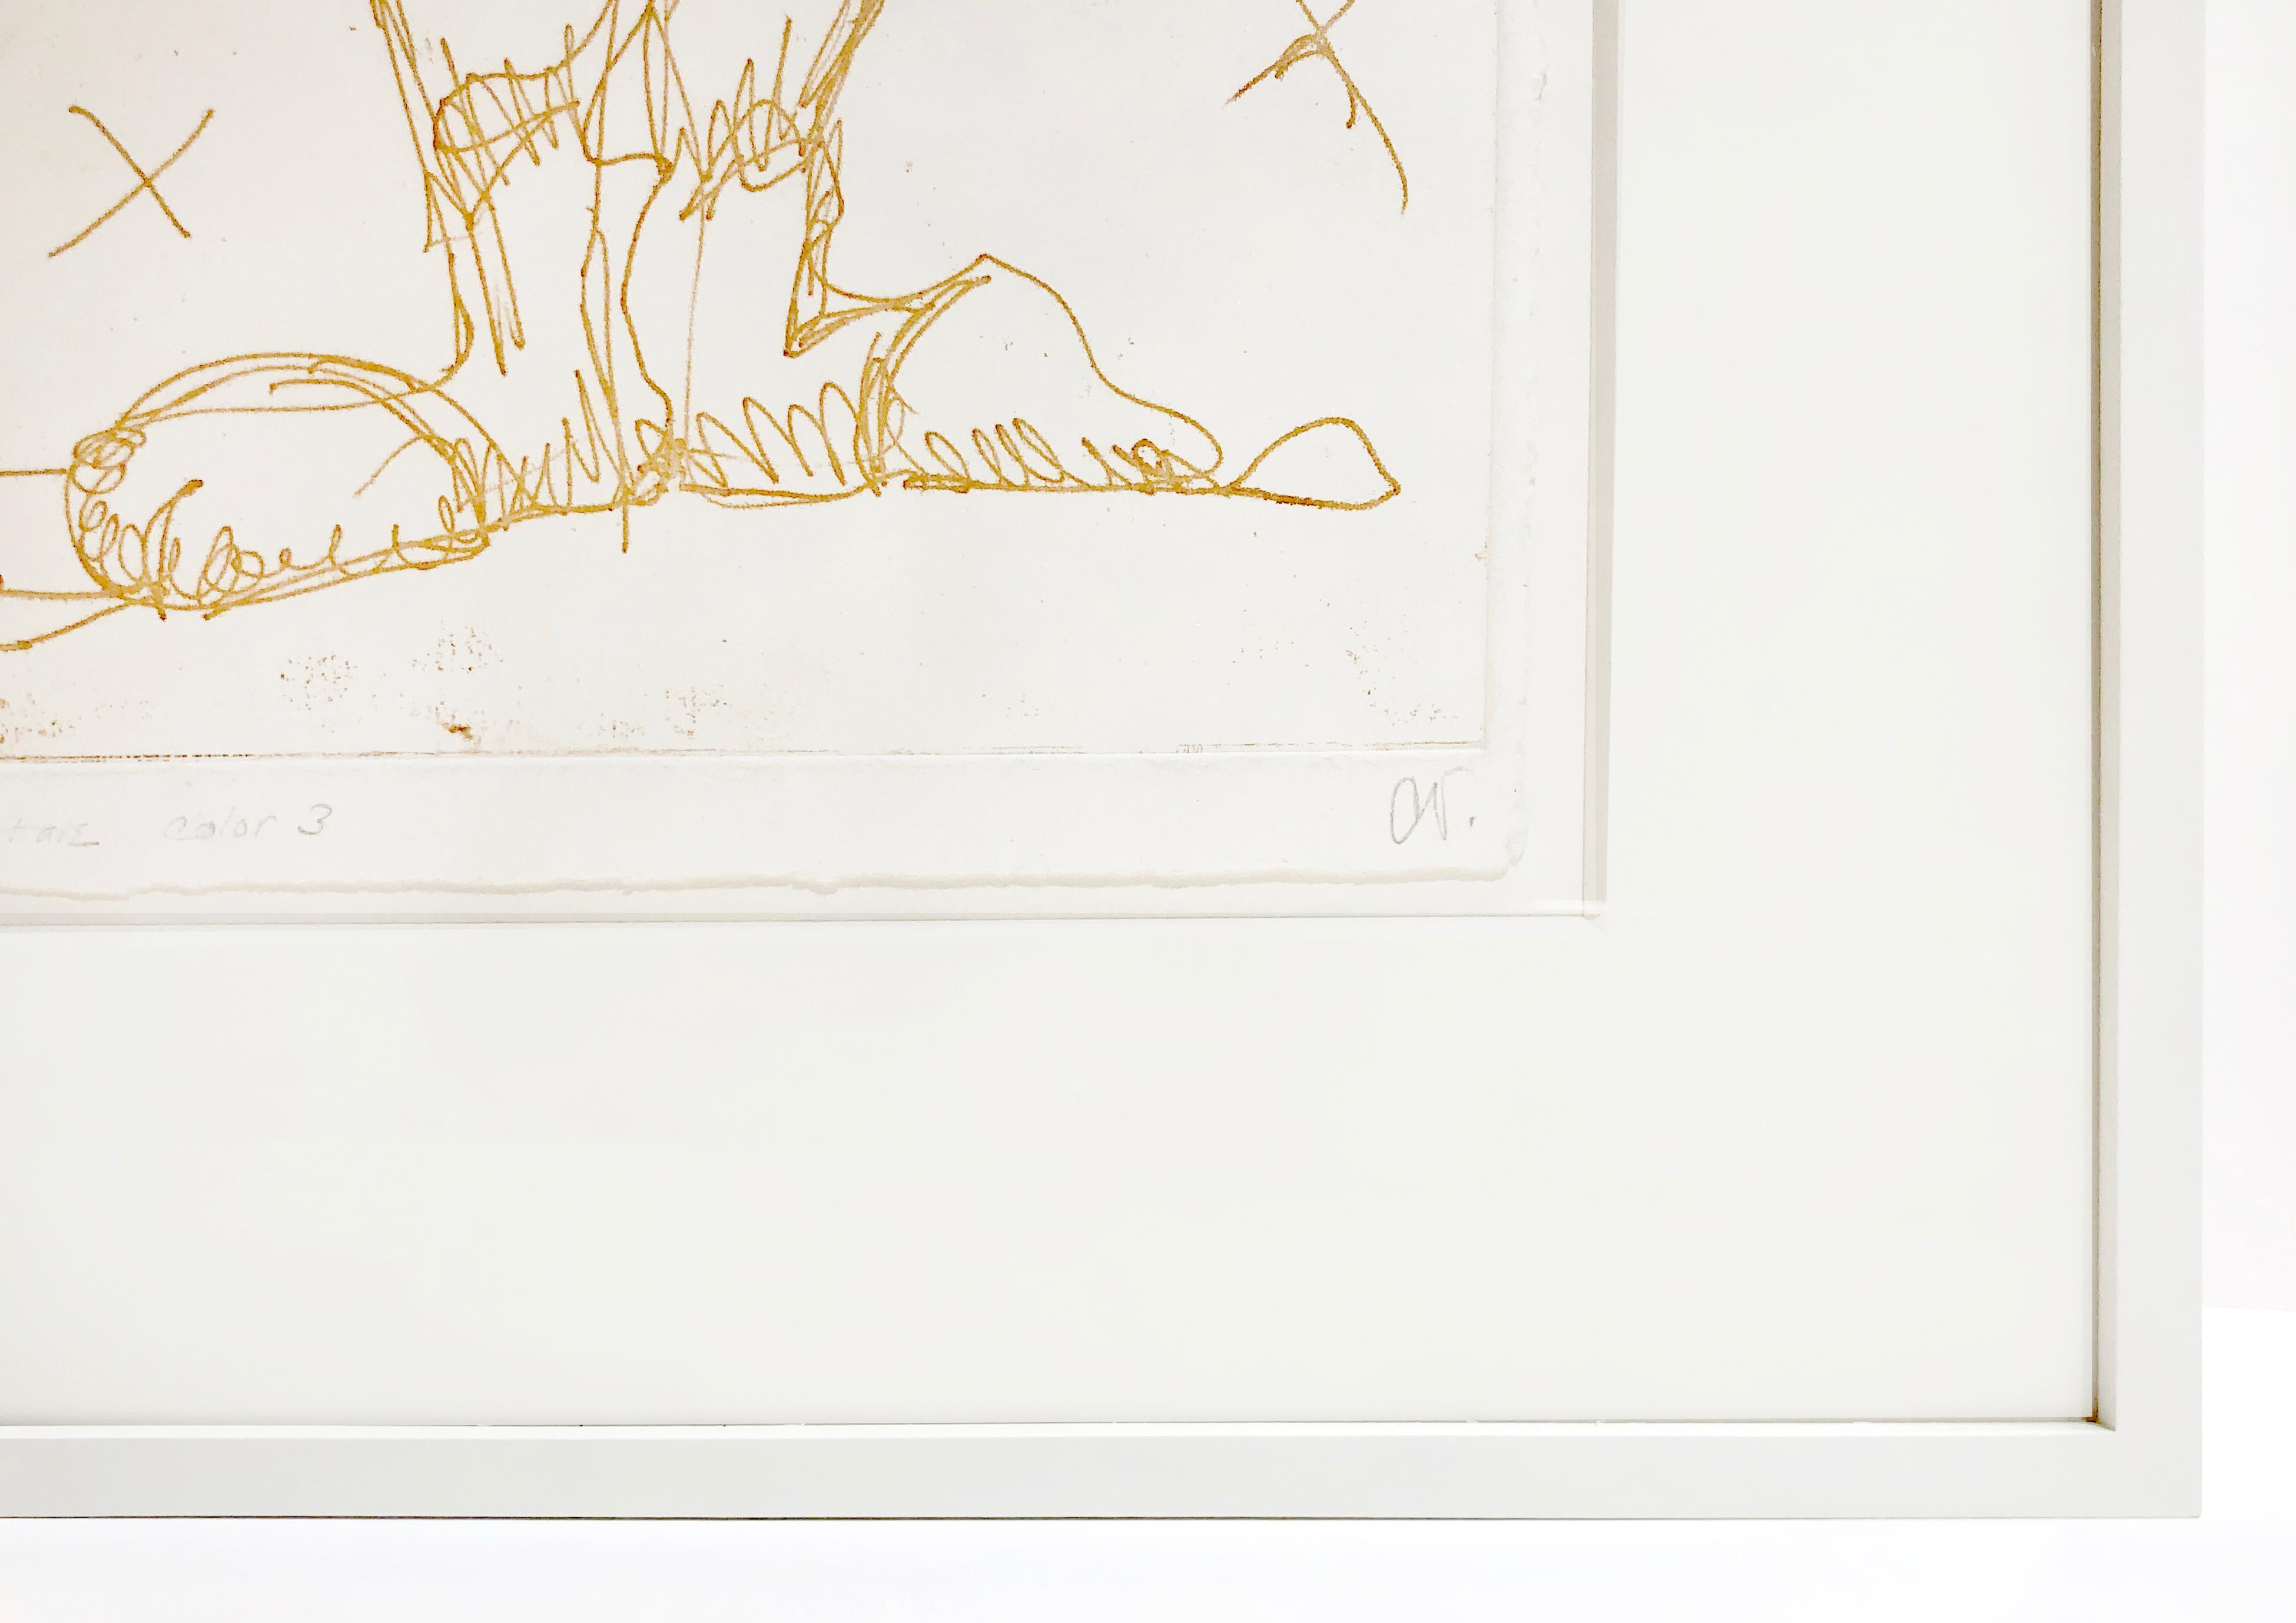 This playful, erotic print by Claes Oldenburg is printed in shimmering gold. A nude woman in outsized cowboy boots stands with hands on hips, an X scribbled on either side of her torso. Wild lines radiating from the crown of her head form a wide